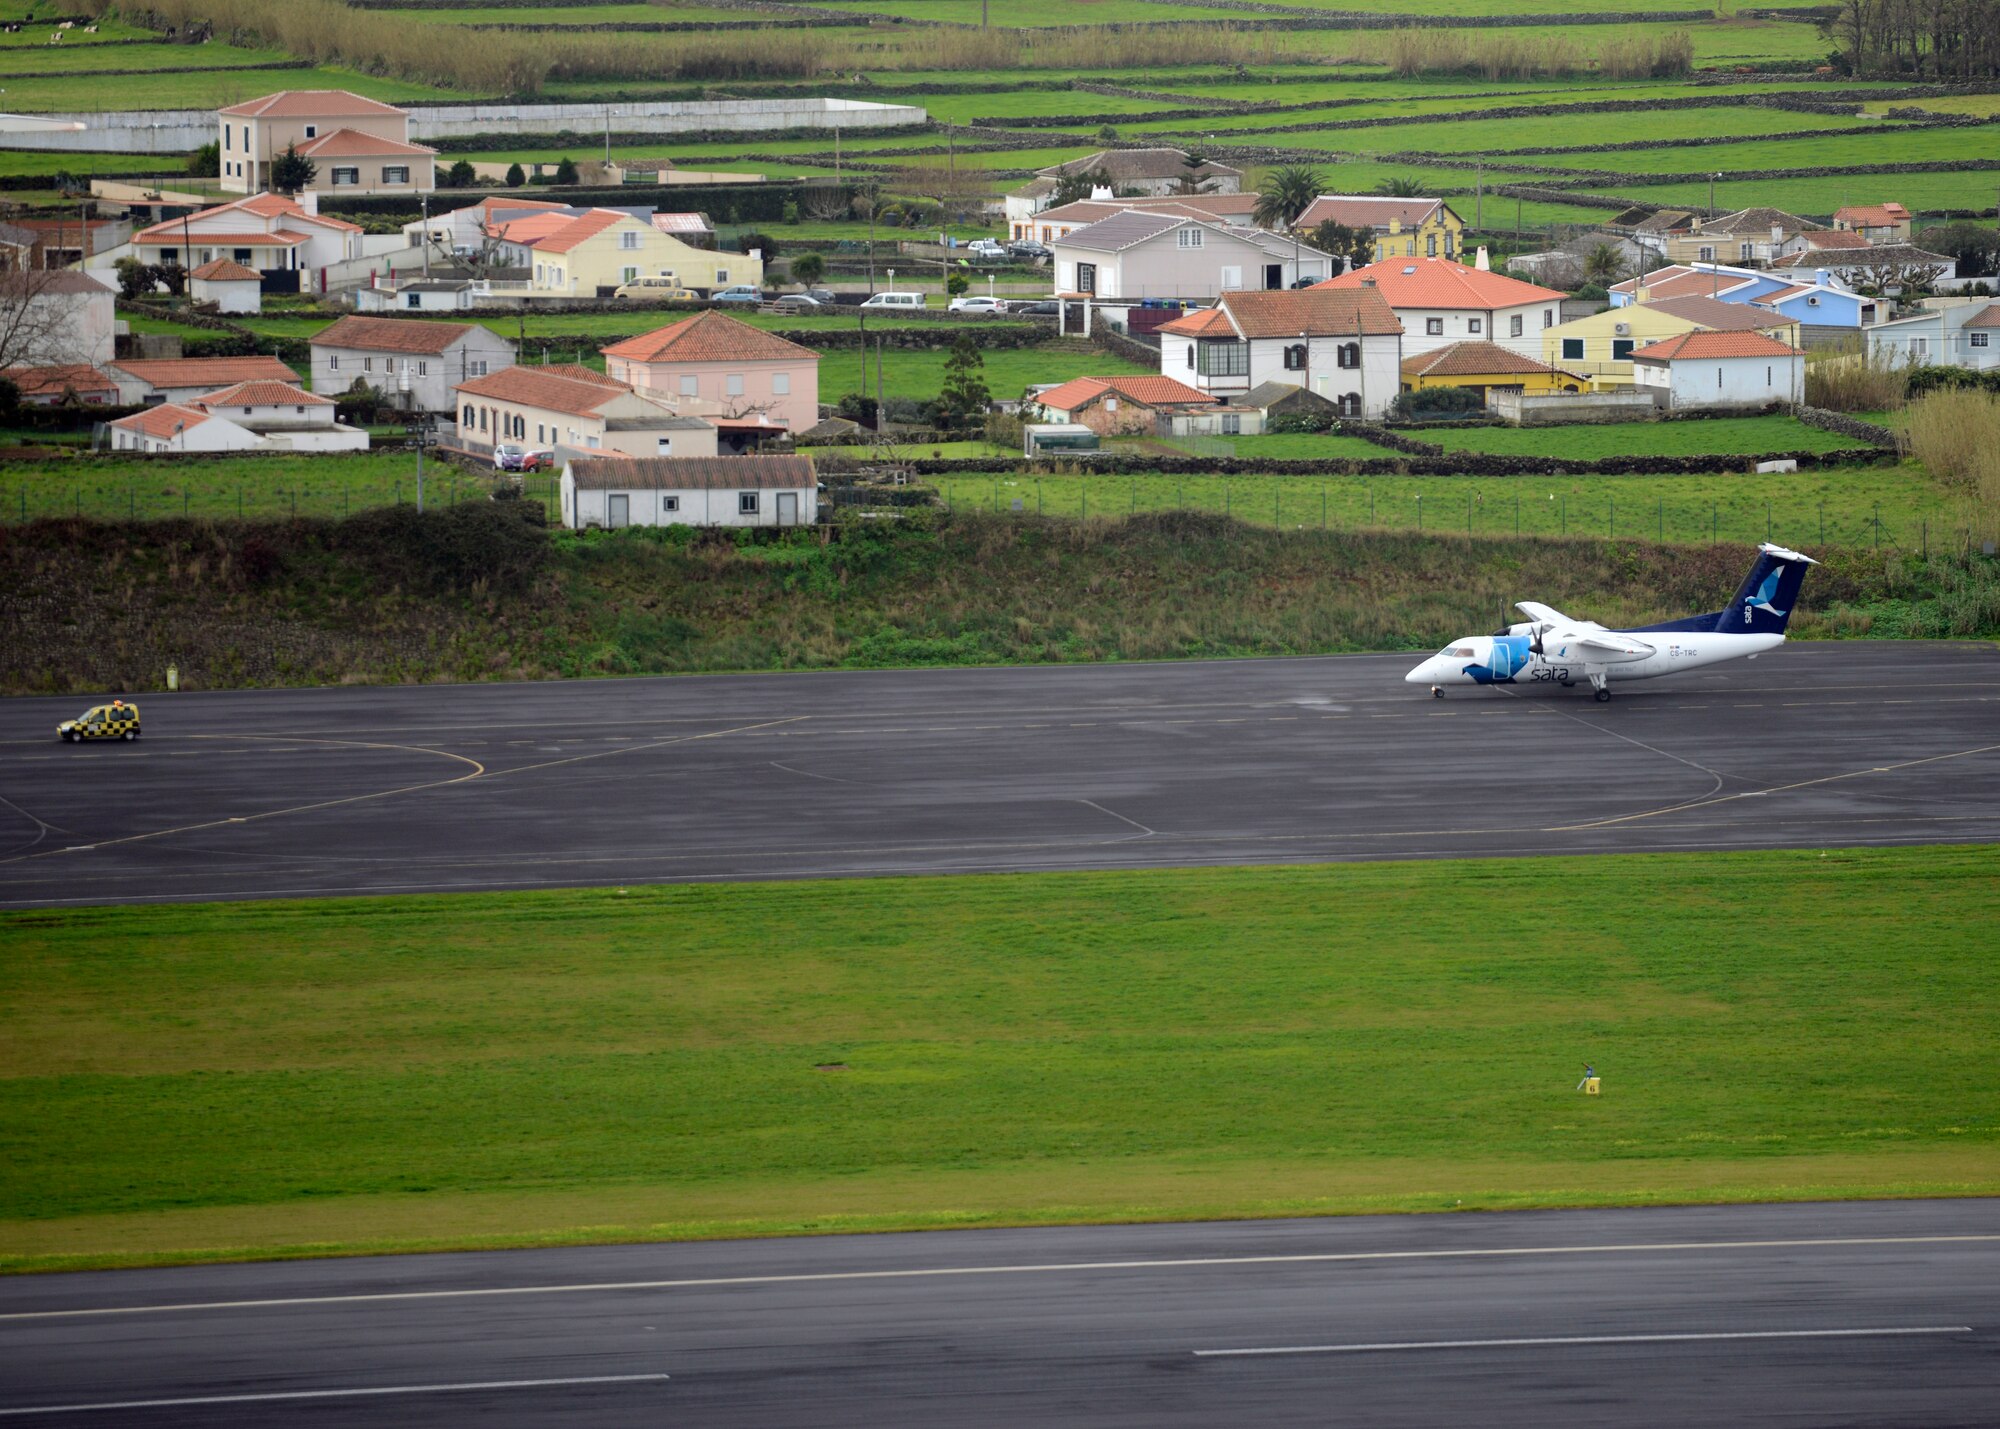 A commercial aircraft lands at Lajes Field, Azores, Feb. 7, 2016. The flightline at Lajes Field is operated by the 65th Air Base Group and shared by the local airport for all passengers coming to the island. The field became a geographically separated unit of the 86th Airlift Wing in August, 2015. (U.S. Air Force photo/Tech. Sgt. Kristopher Levasseur)